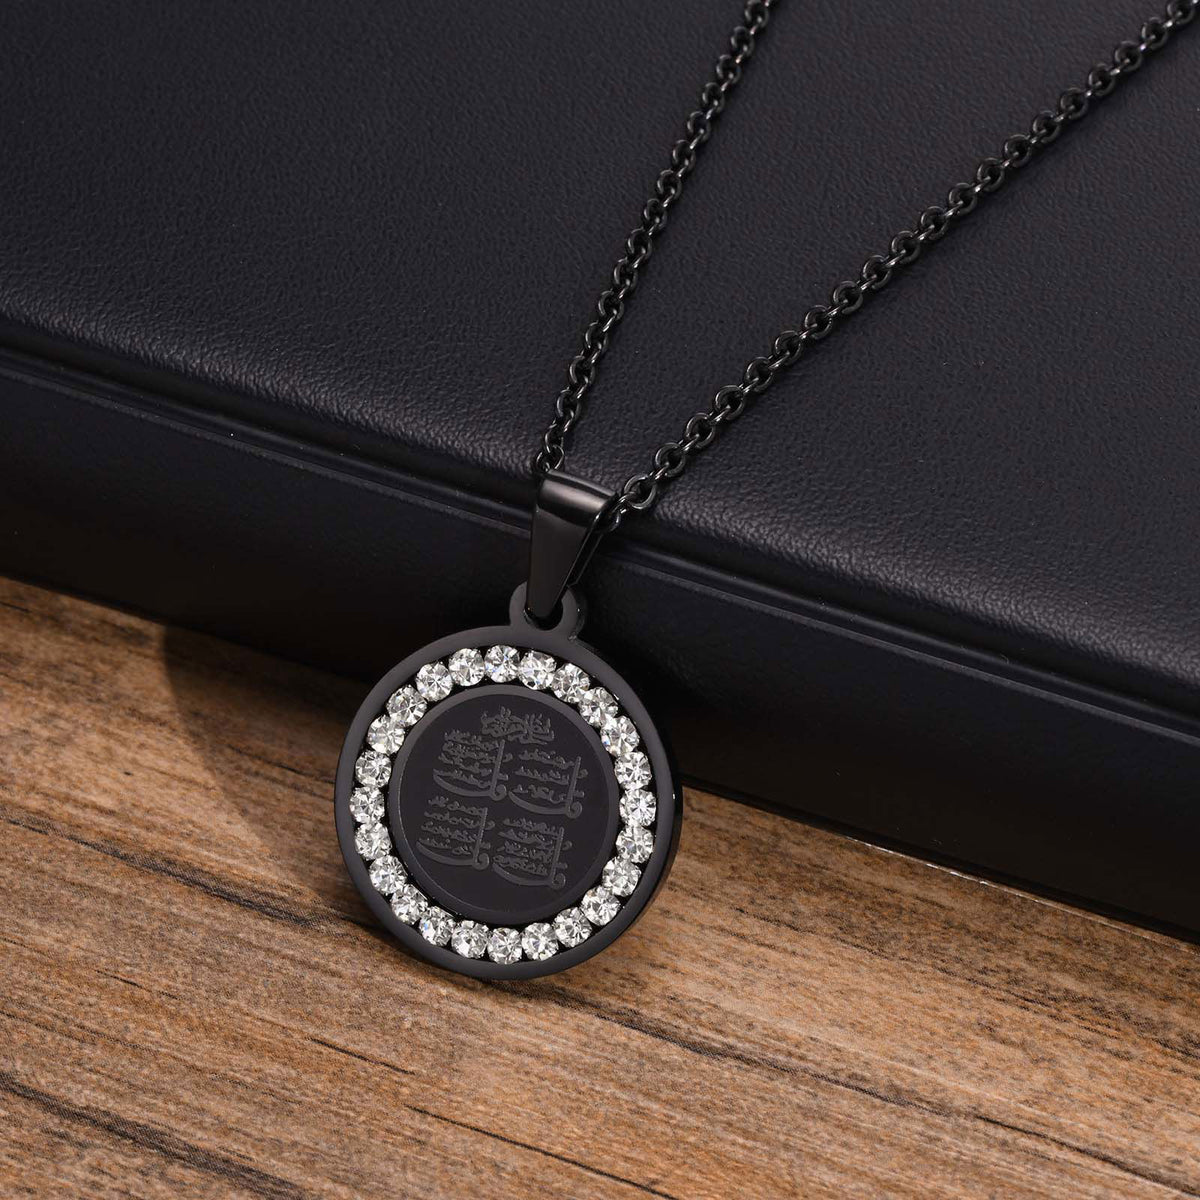 4 Qul Black Stainless Steel Necklace Islamic Jewelry - Islamic Gallery